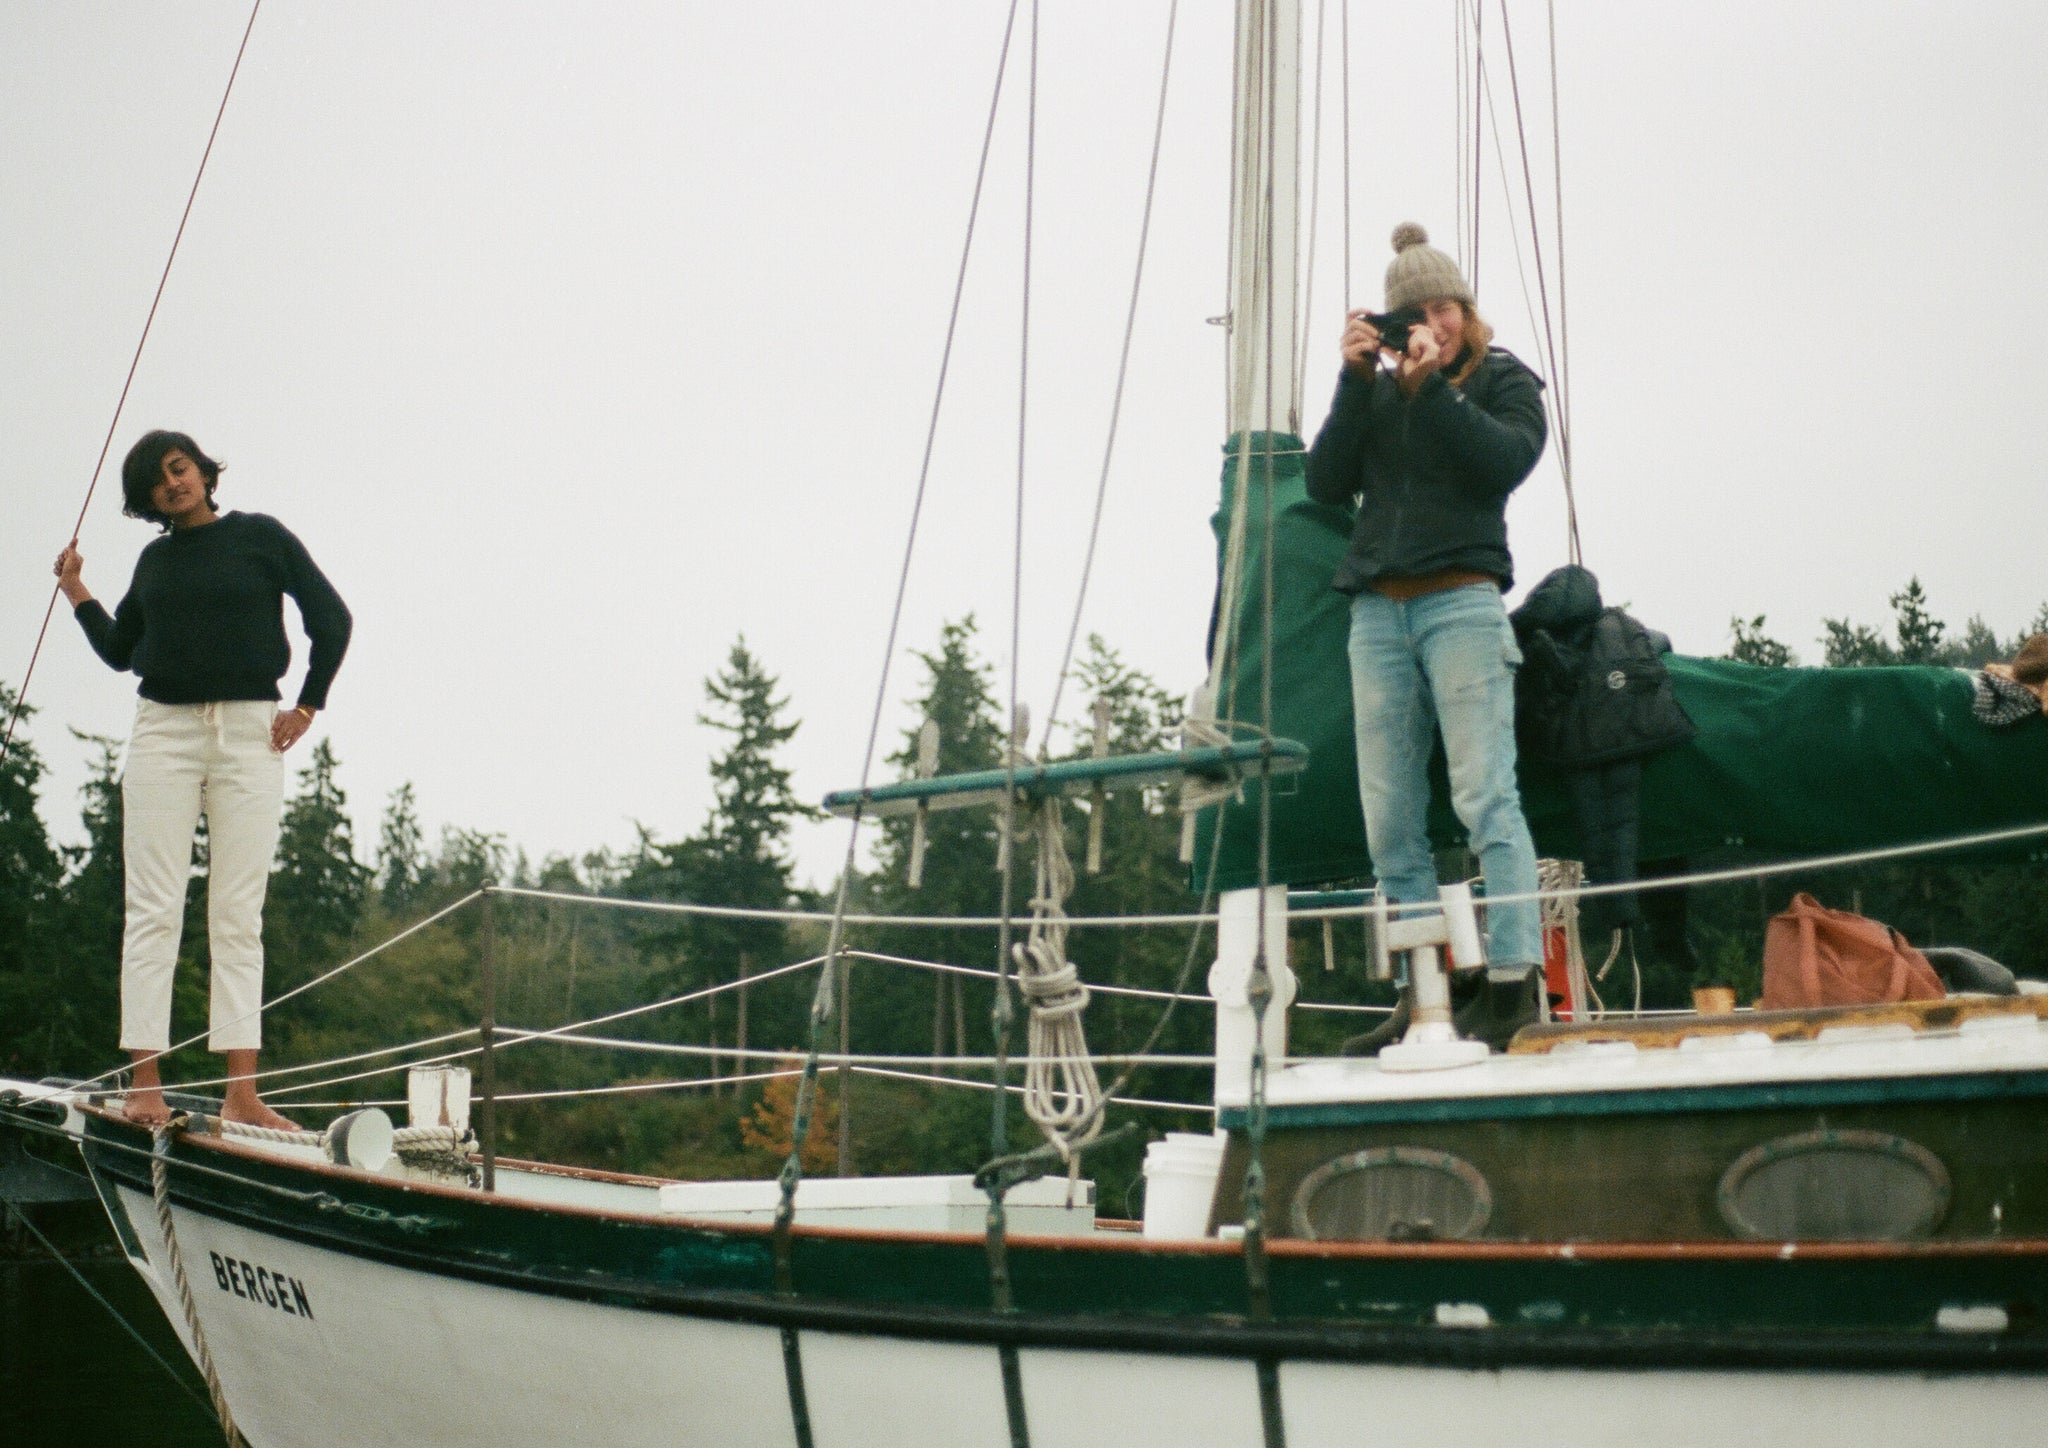 Two people stood on a sailboat